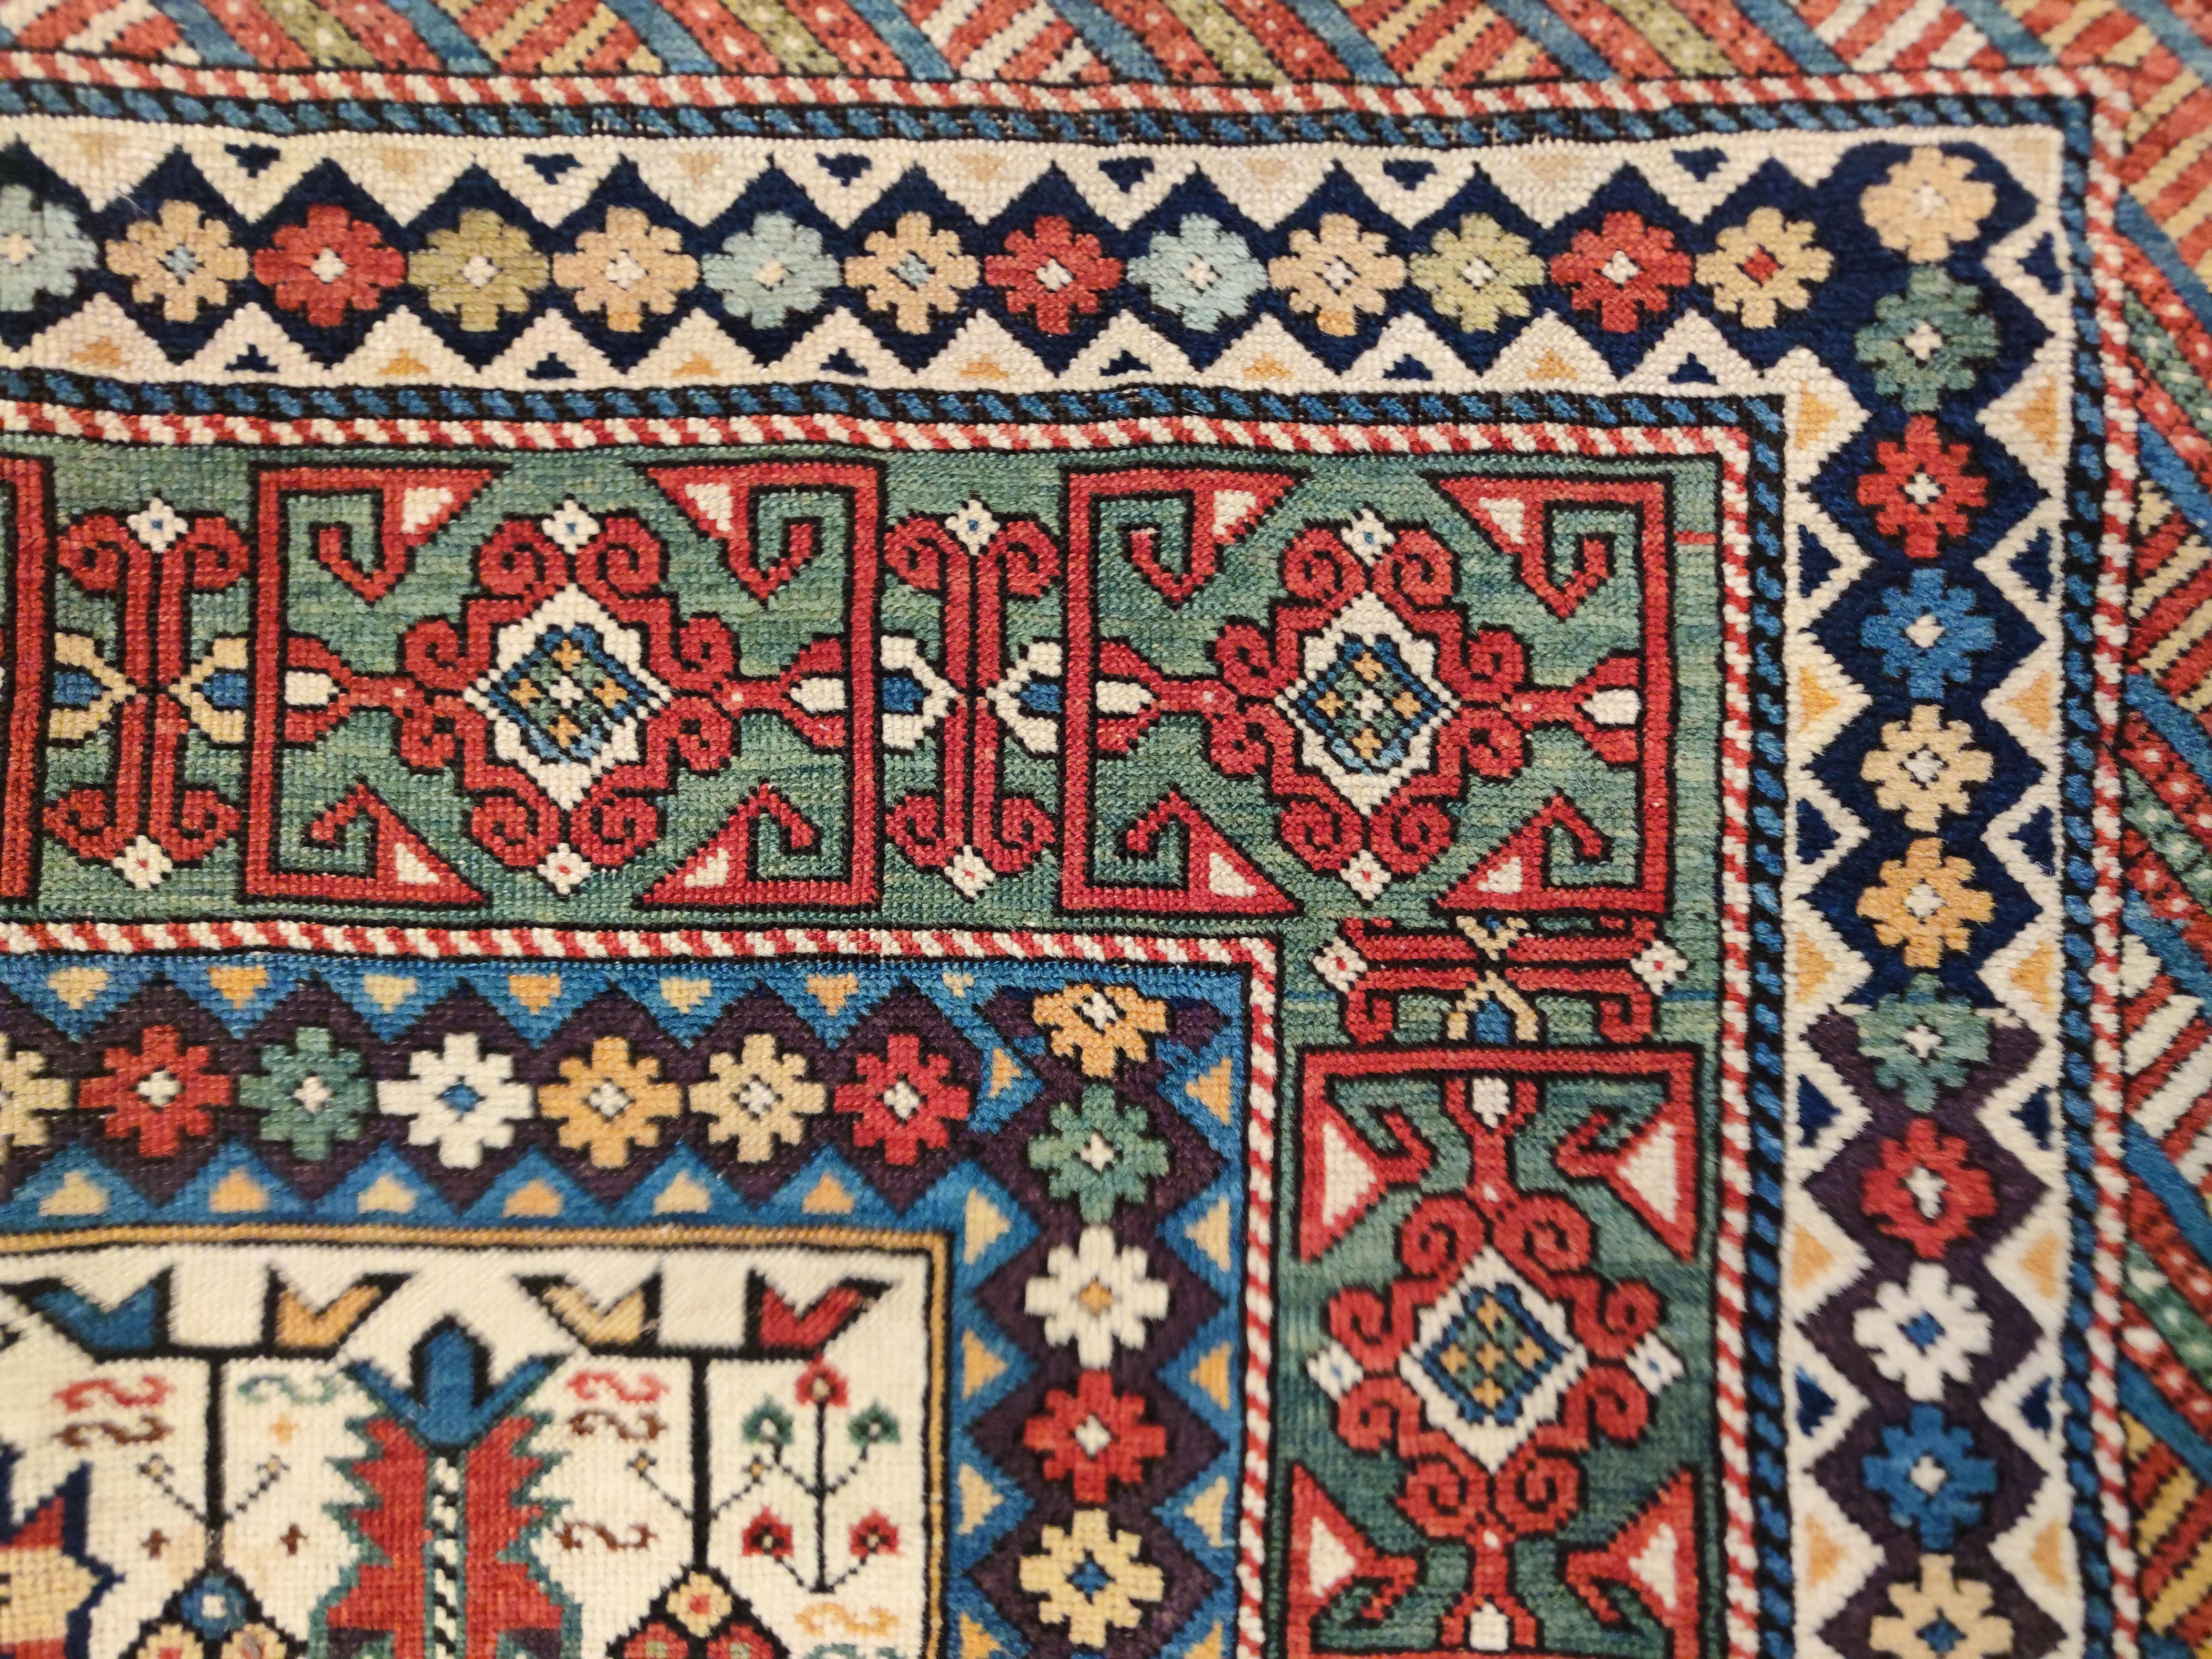 Using a rare and highly successful white field, this exceptional Caucasian rug from eastern Azerbaijan draws rows of ornament associated both with the Chi-Chi subgroup as well as with examples originating from the northern region of Daghestan. Of